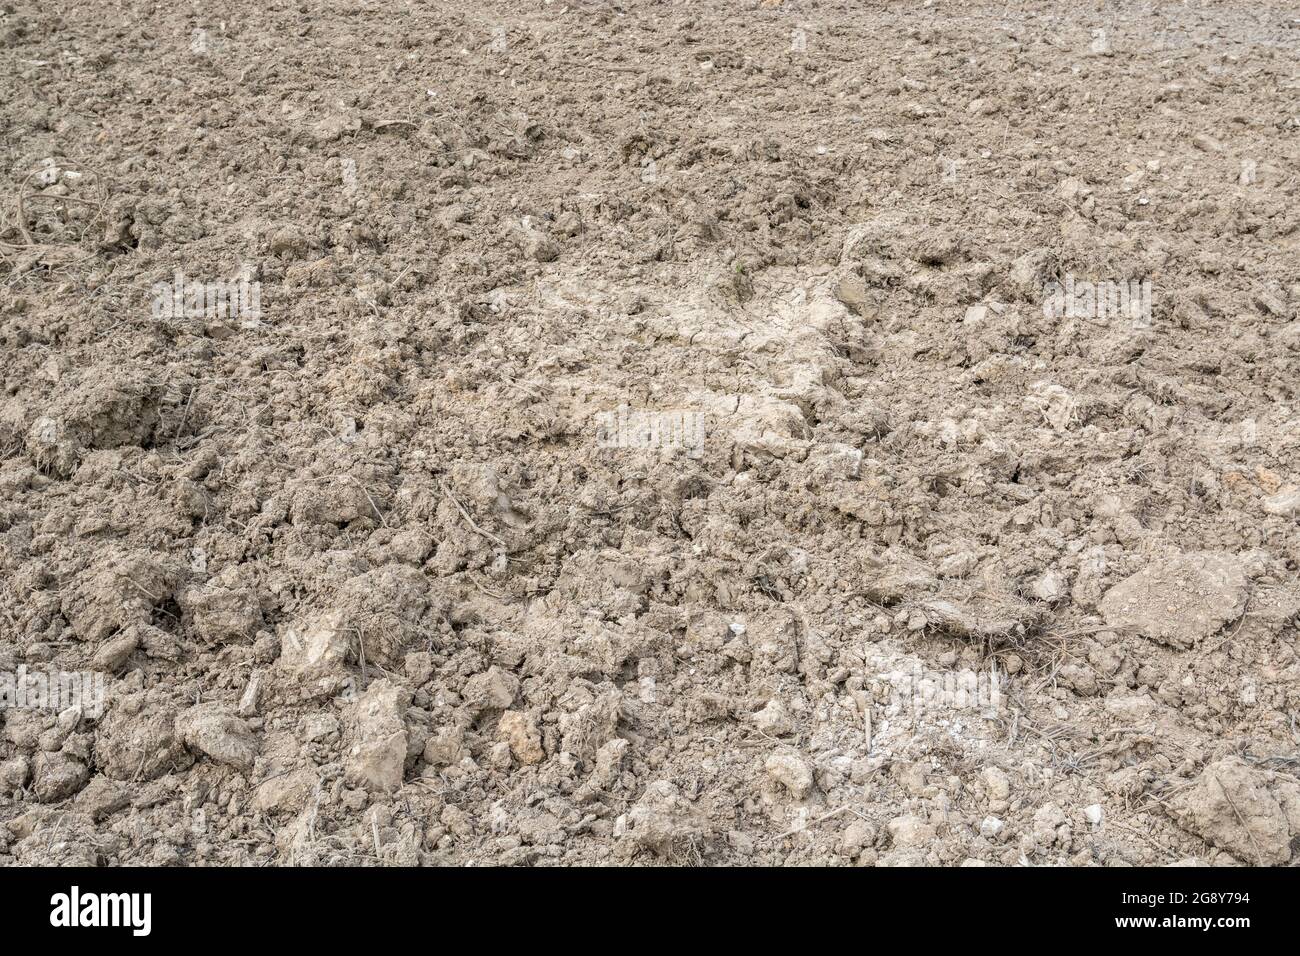 Dry clods of earth in UK field. For 2021 heatwave, drought, parched earth, crop losses, European or US heatwave, hot summer season, dry farmland. Stock Photo